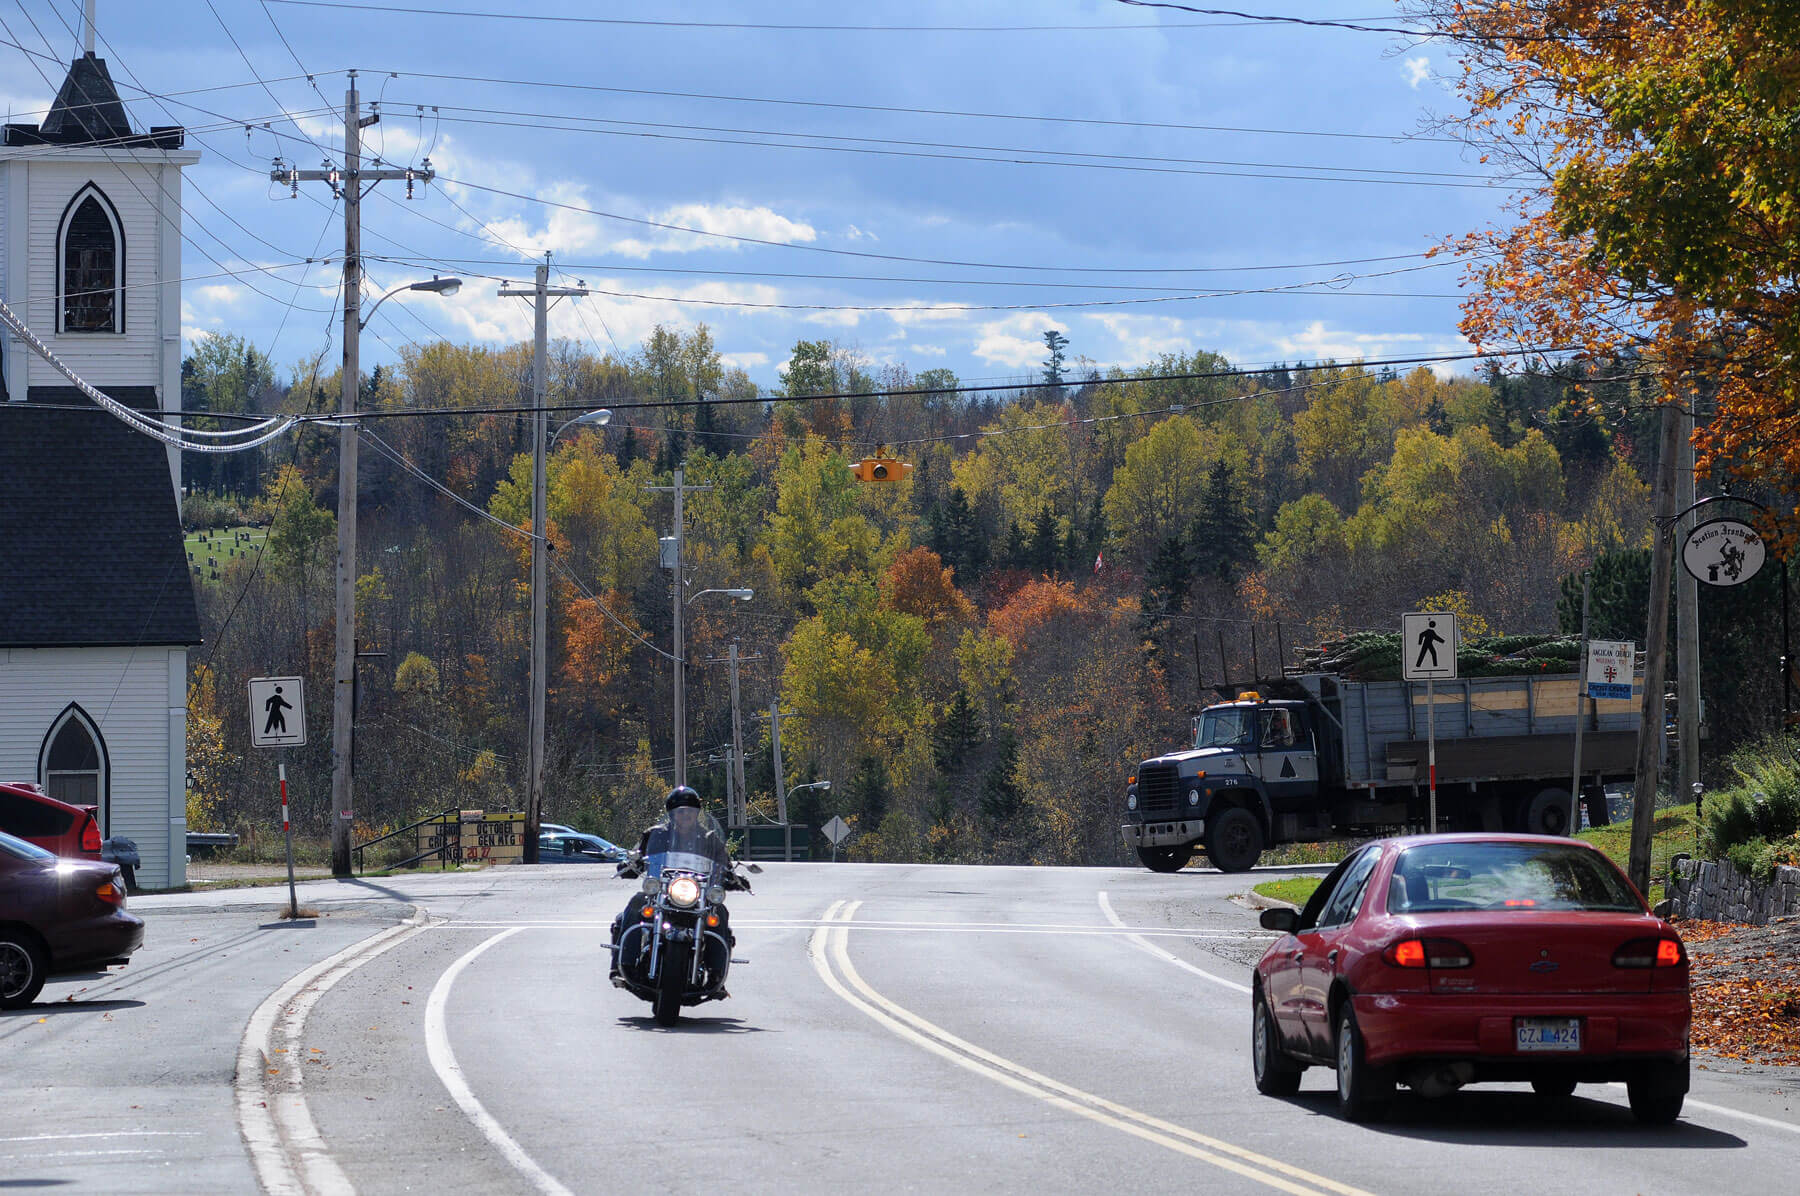 An intersection in New Ross. A motorcyclist travels toward the camera, a car travels away from the camera, and a truck carrying Christmas trees waits at a stop sign.